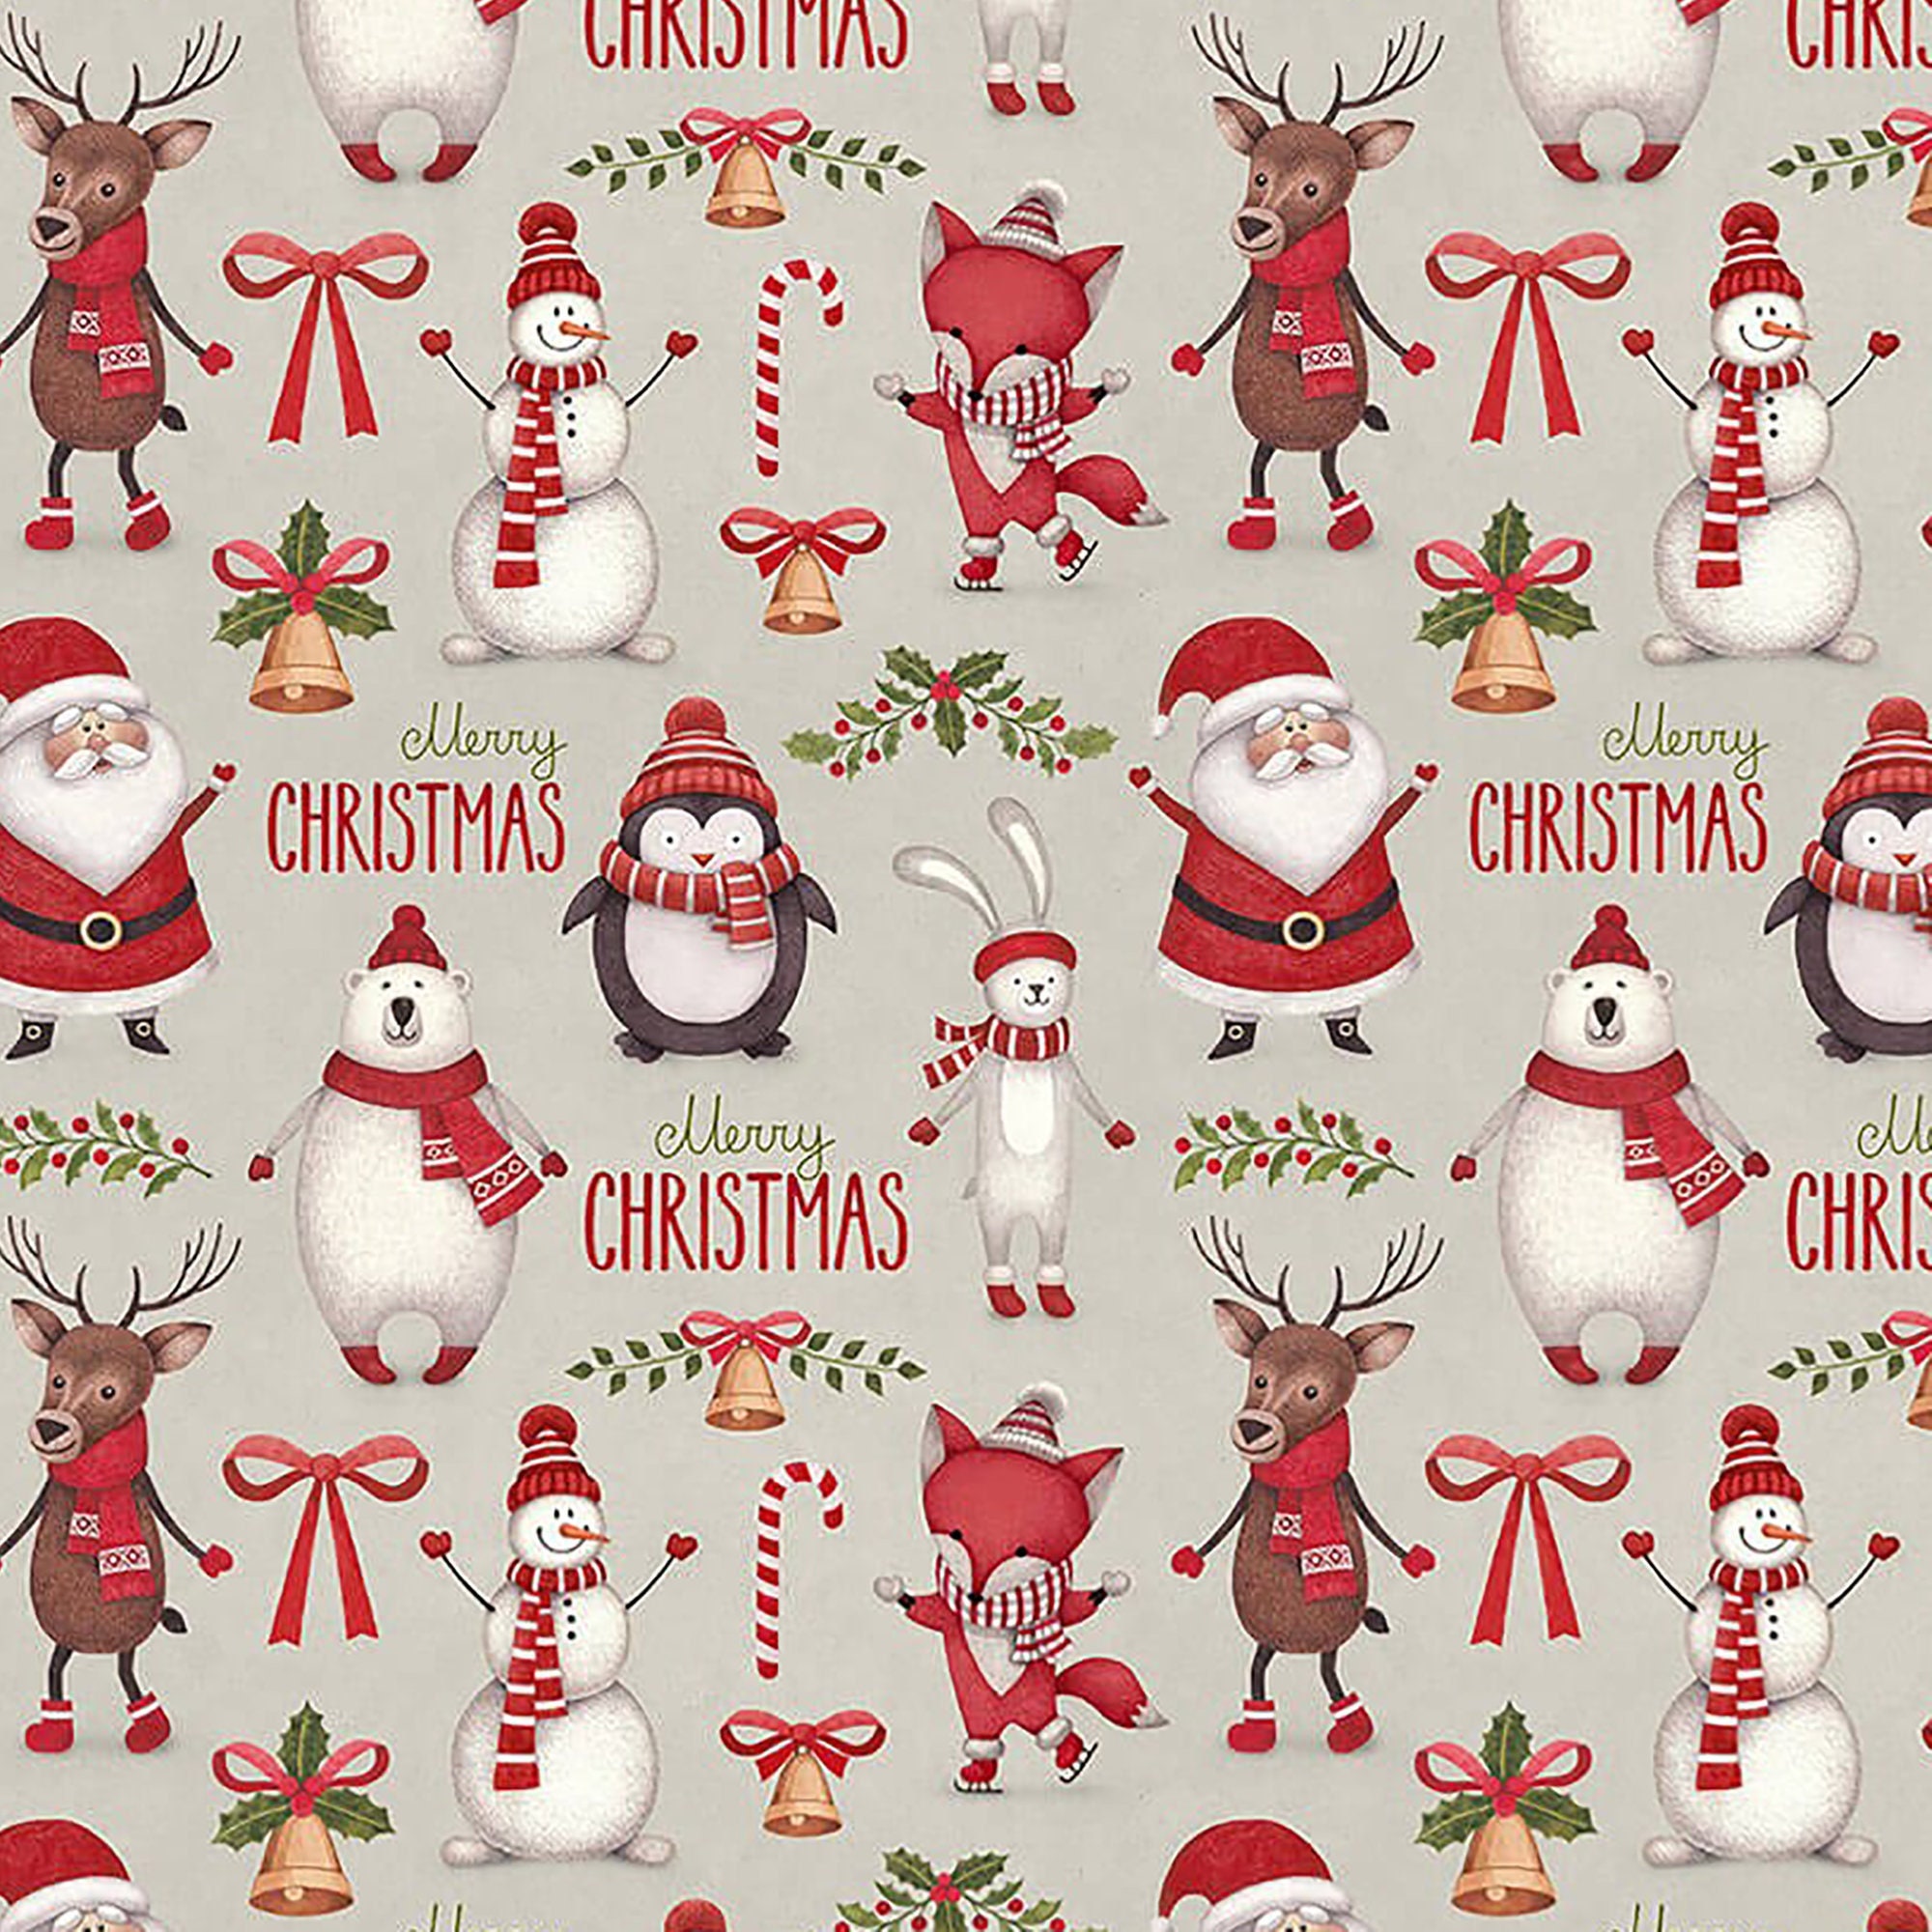 Christmas Fabric by the Yard, Cartoon Santa Claus Trees Teddy Bears Candies  Sketchy Design Print, Decorative Upholstery Fabric for Sofas and Home  Accents, Olive Green White by Ambesonne 